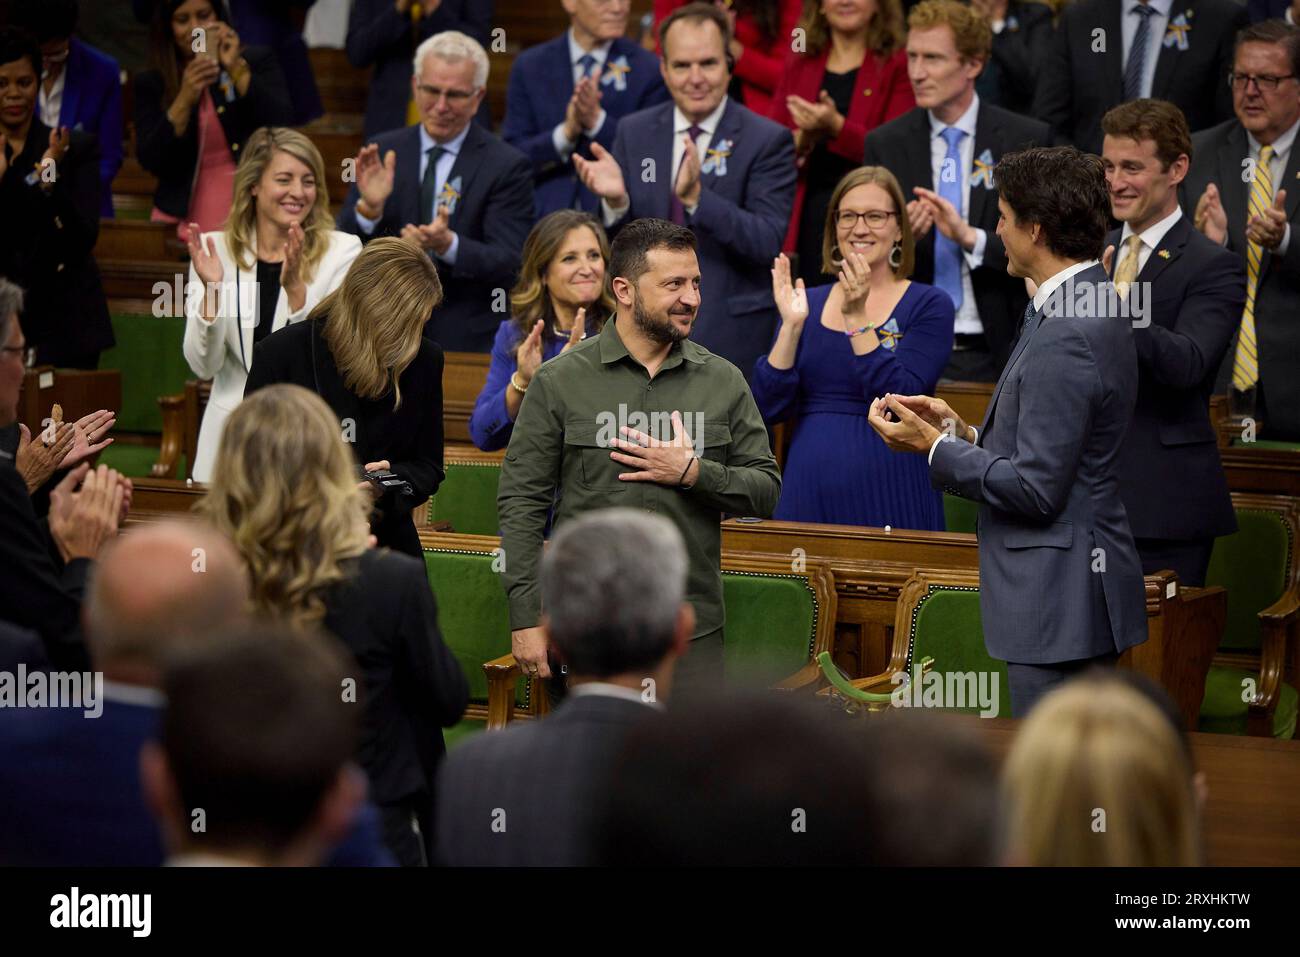 Ottawa, Canada. 22nd Sep, 2023. Ukrainian President Volodymyr Zelenskyy, center, receives a standing ovation from Canadian Prime Minister Justin Trudeau, right, and members of parliament after addressing the House of Commons on Parliament Hill, September 22, 2023 in Ottawa, Canada. Credit: Ukraine Presidency/Ukrainian Presidential Press Office/Alamy Live News Stock Photo